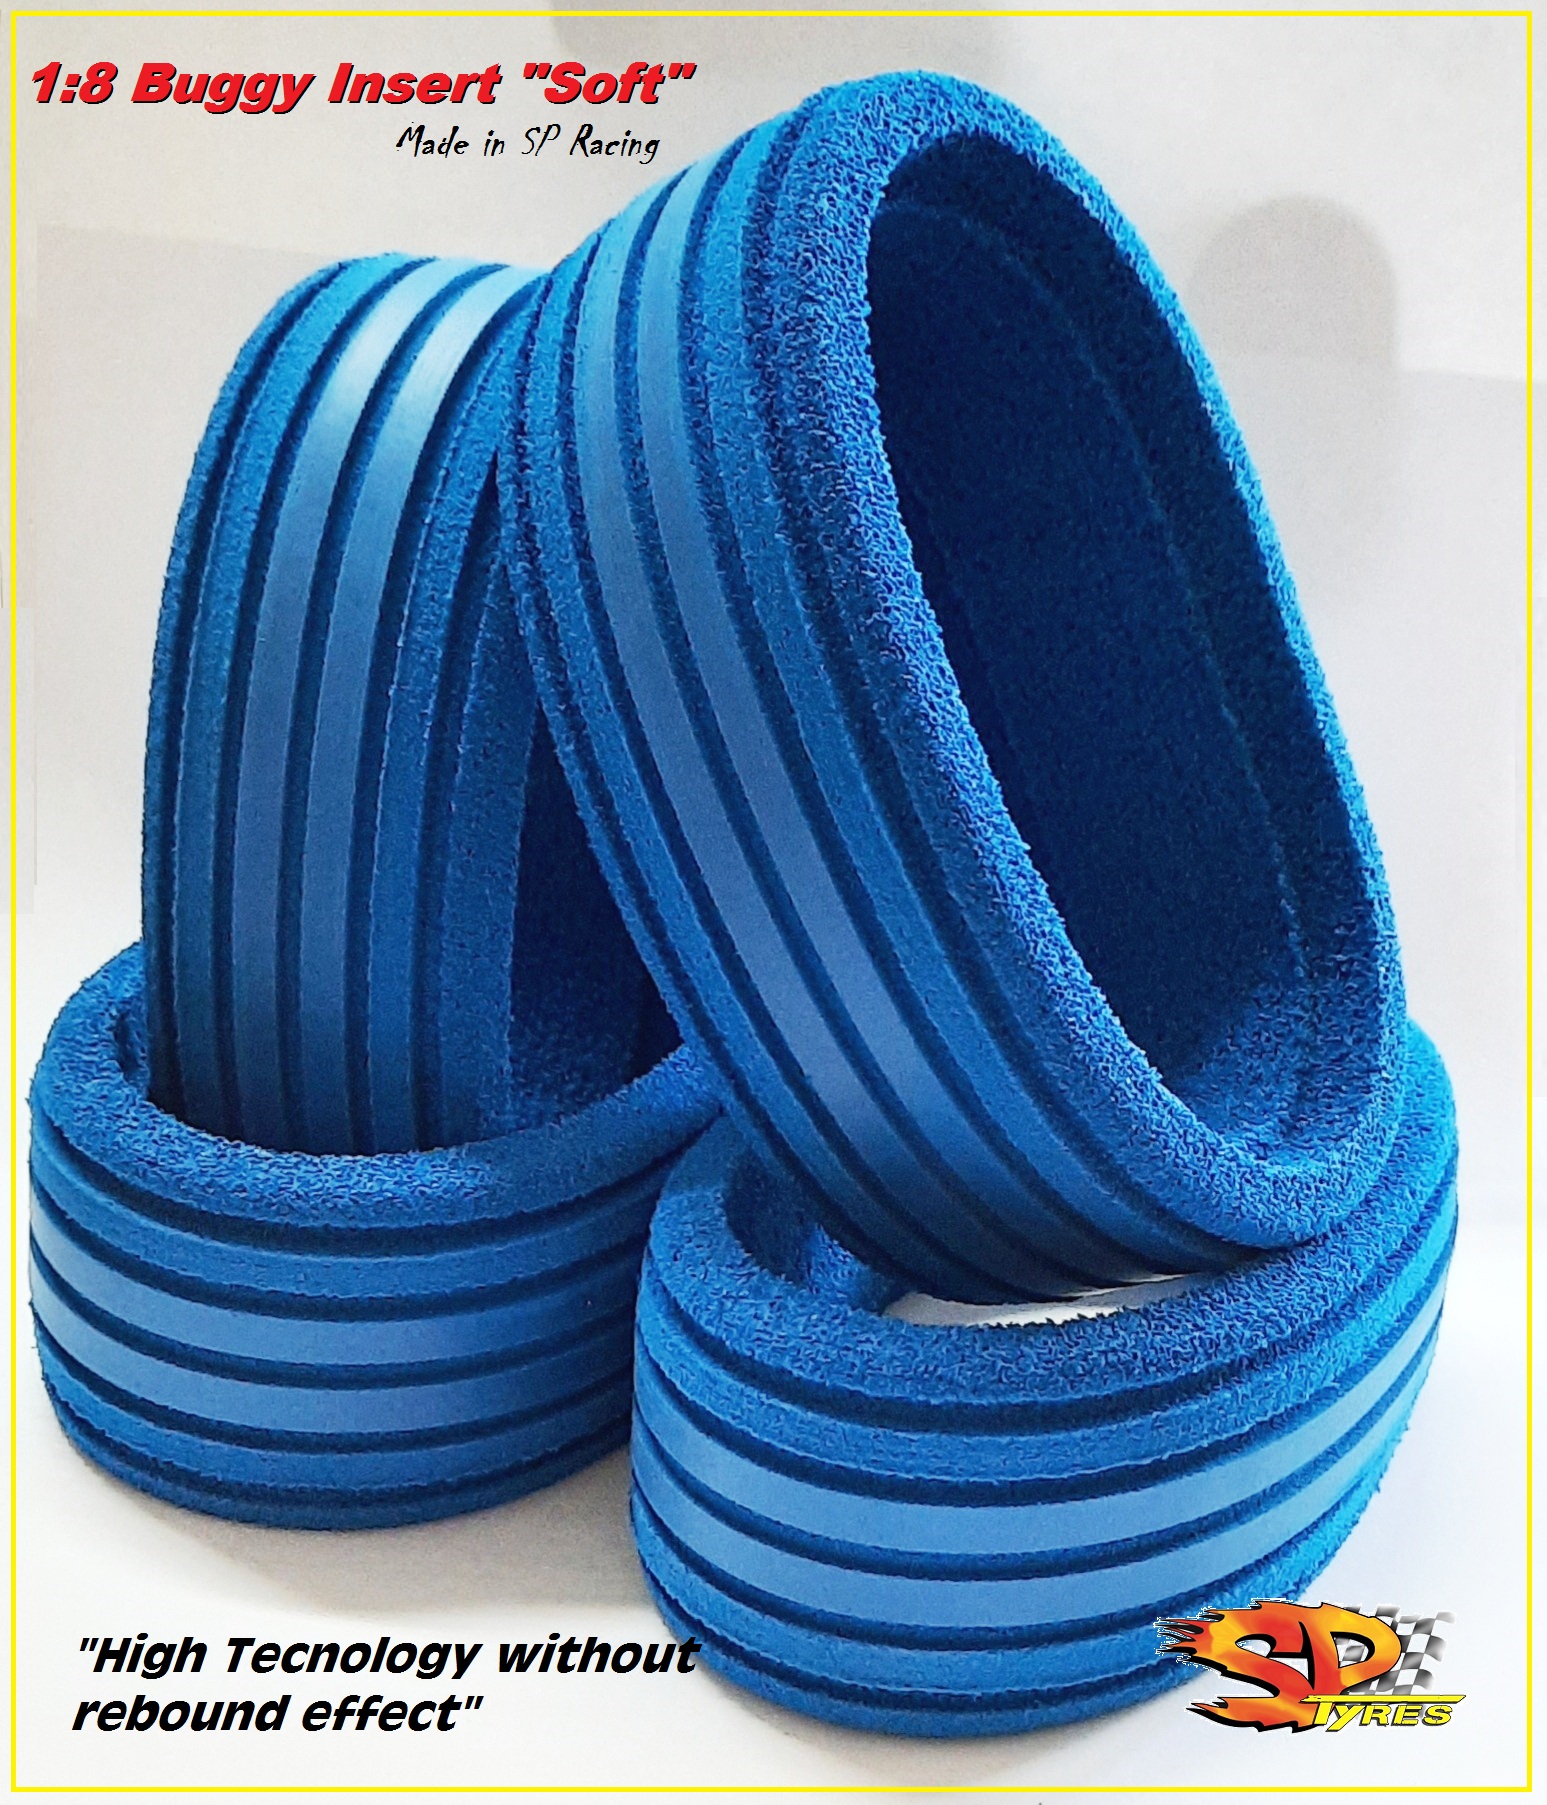 Inserts for 1:8 Buggy "Soft" Blue, profile for SP Racing tires (